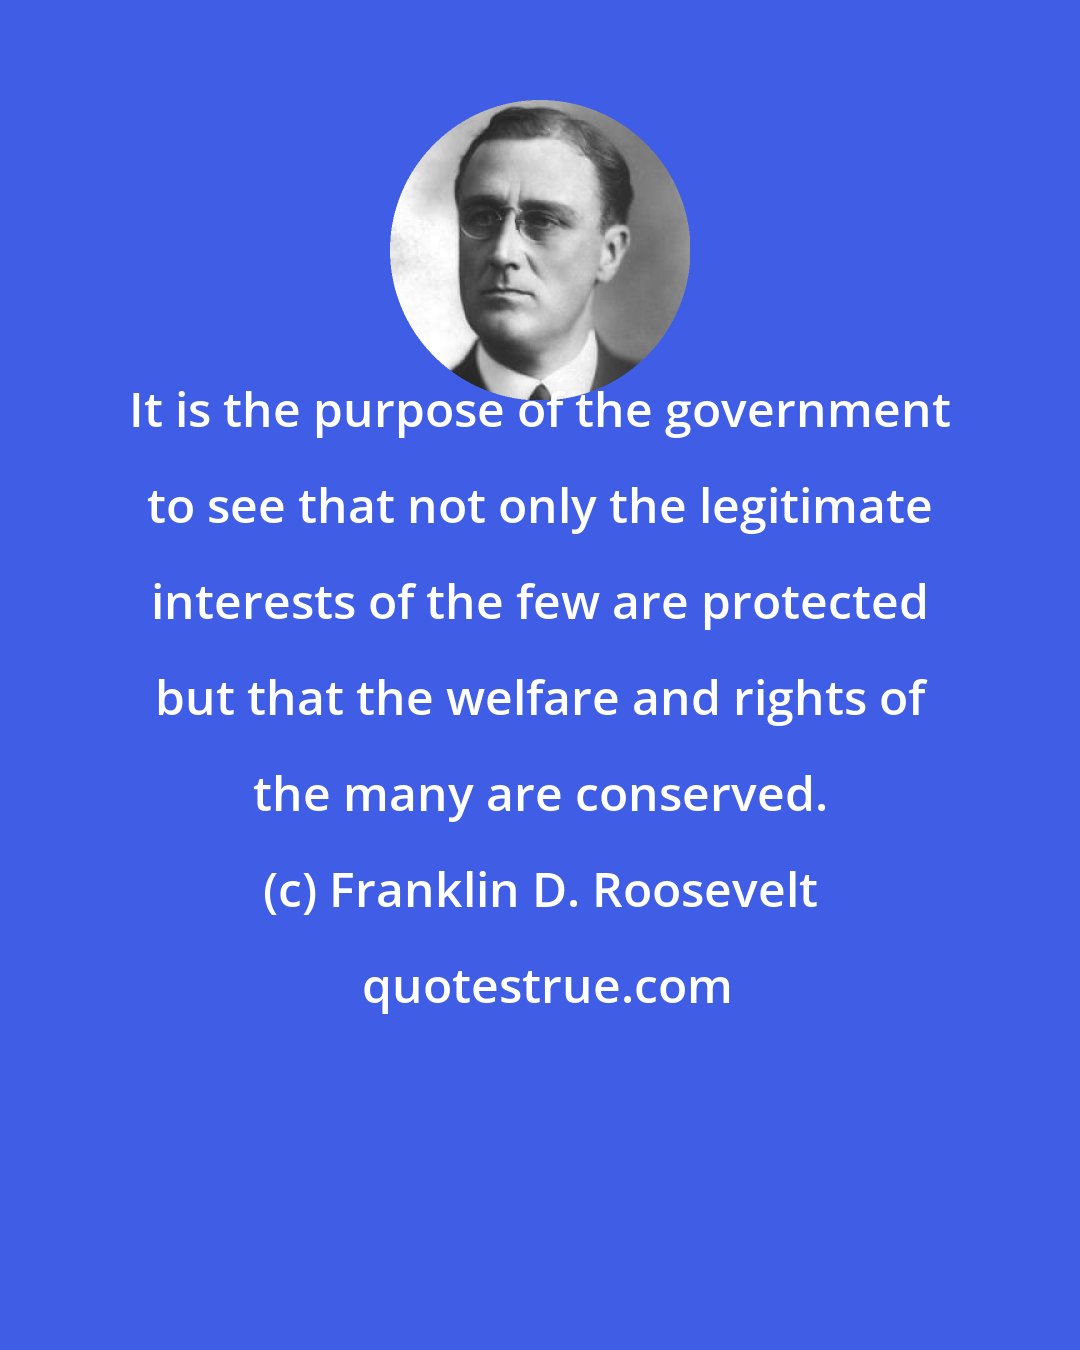 Franklin D. Roosevelt: It is the purpose of the government to see that not only the legitimate interests of the few are protected but that the welfare and rights of the many are conserved.